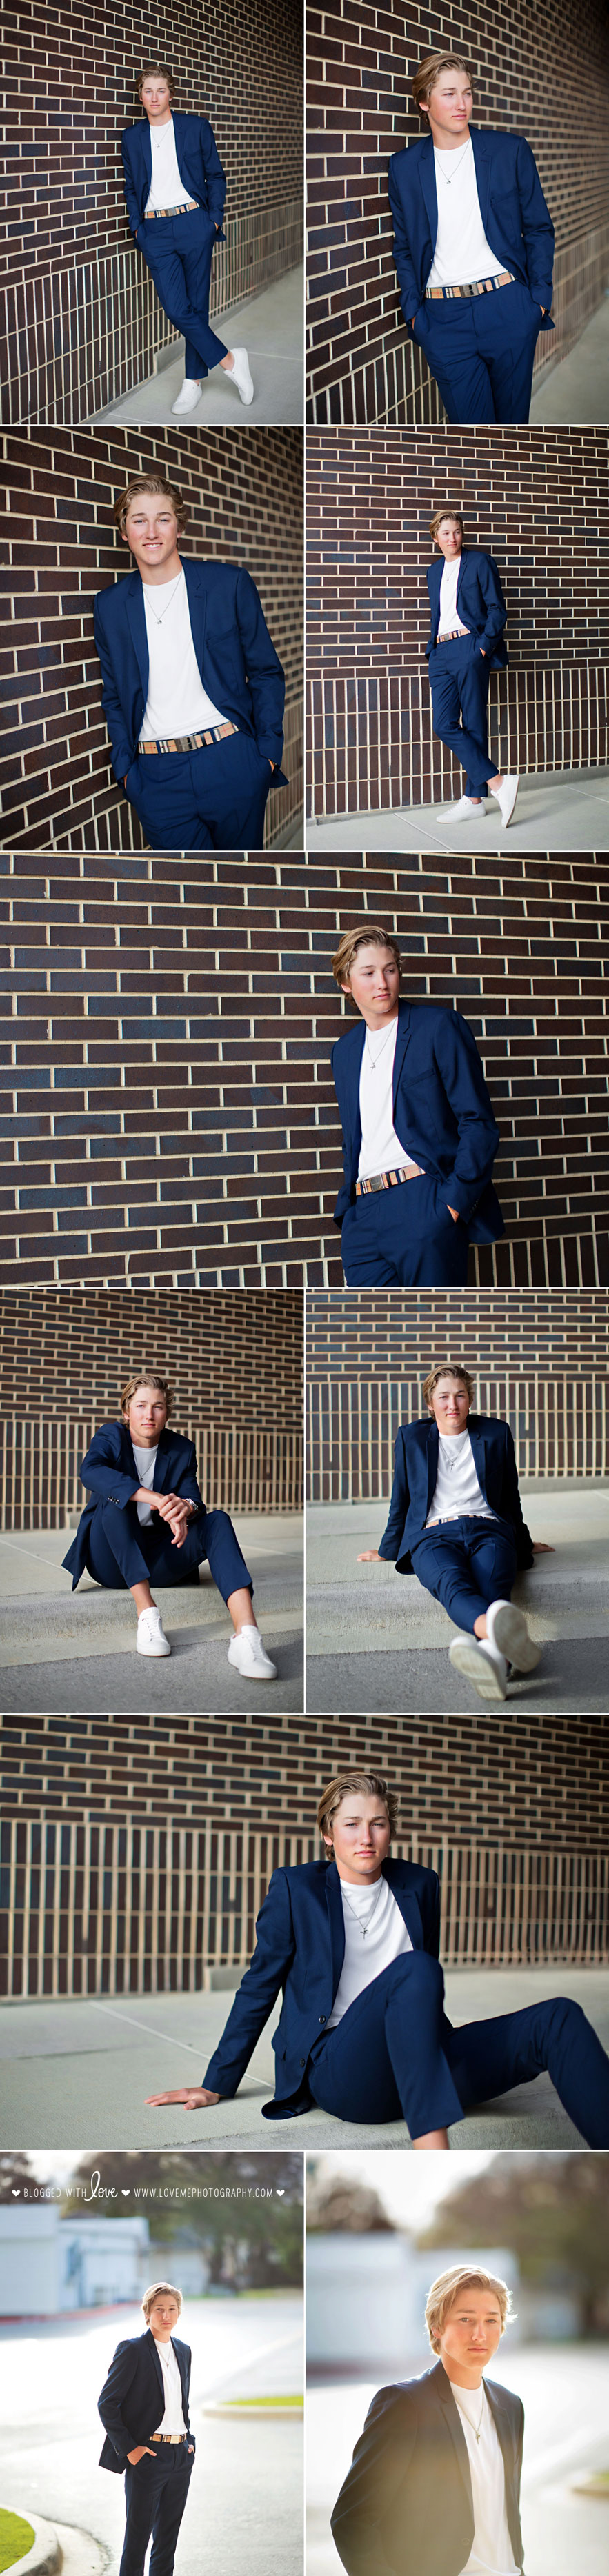 Photography session of senior wearing navy jacket and white shoes against brick background